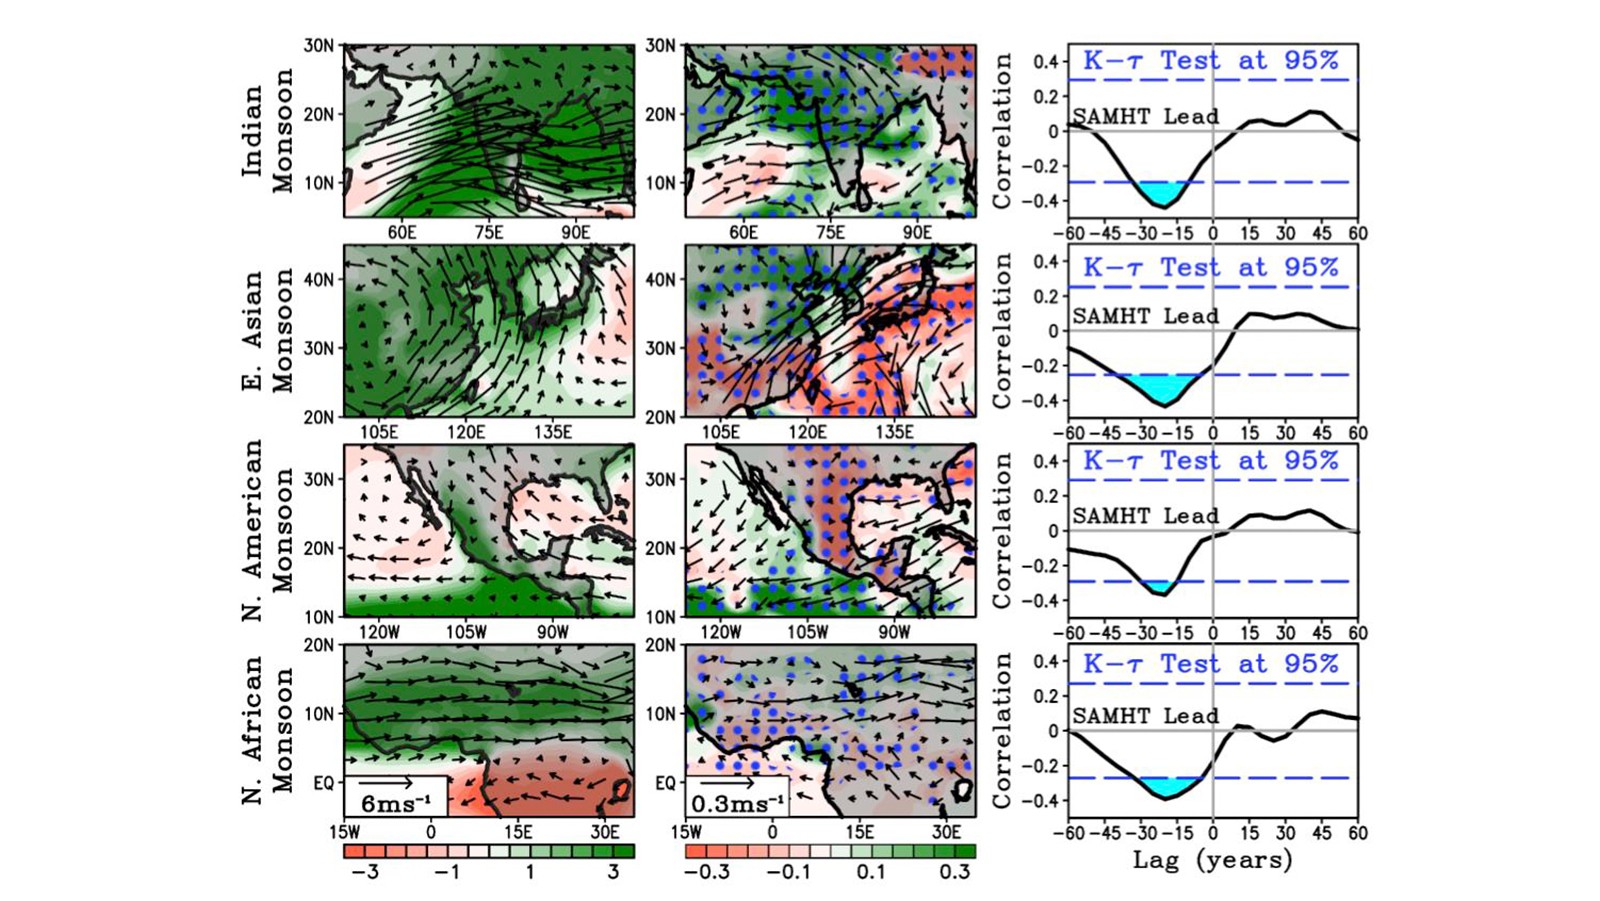 (left column) Seasonality of precipitation and 850mb winds for the monsoon regions as measured by the difference between June-July-August-September (JJAS) minus annual mean precipitation and winds. (middle-column) shows the composite difference of JJAS precipitation (shaded) and 850mb wind for each monsoon region with respect to weak minus strong SAMHT at lead-time 20 years after the anomalous SAMHT. Blue stipples indicates regions where precipitation differences are significant at 95% confidence level based on a non-parametric Kolmogorov-Smirnov test. (right-column) Lag-lead Spearman ranked correlation between SAMHT and NH monsoon index. The blue dashed lines depict the 95% significance level based on a non-parametric Kendall-t test. Negative lag indicates periods when SAMHT leads the NH monsoon index. Periods with significant correlation between the SAMHT and monsoon are shaded blue. Image Credit: NOAA AOML.